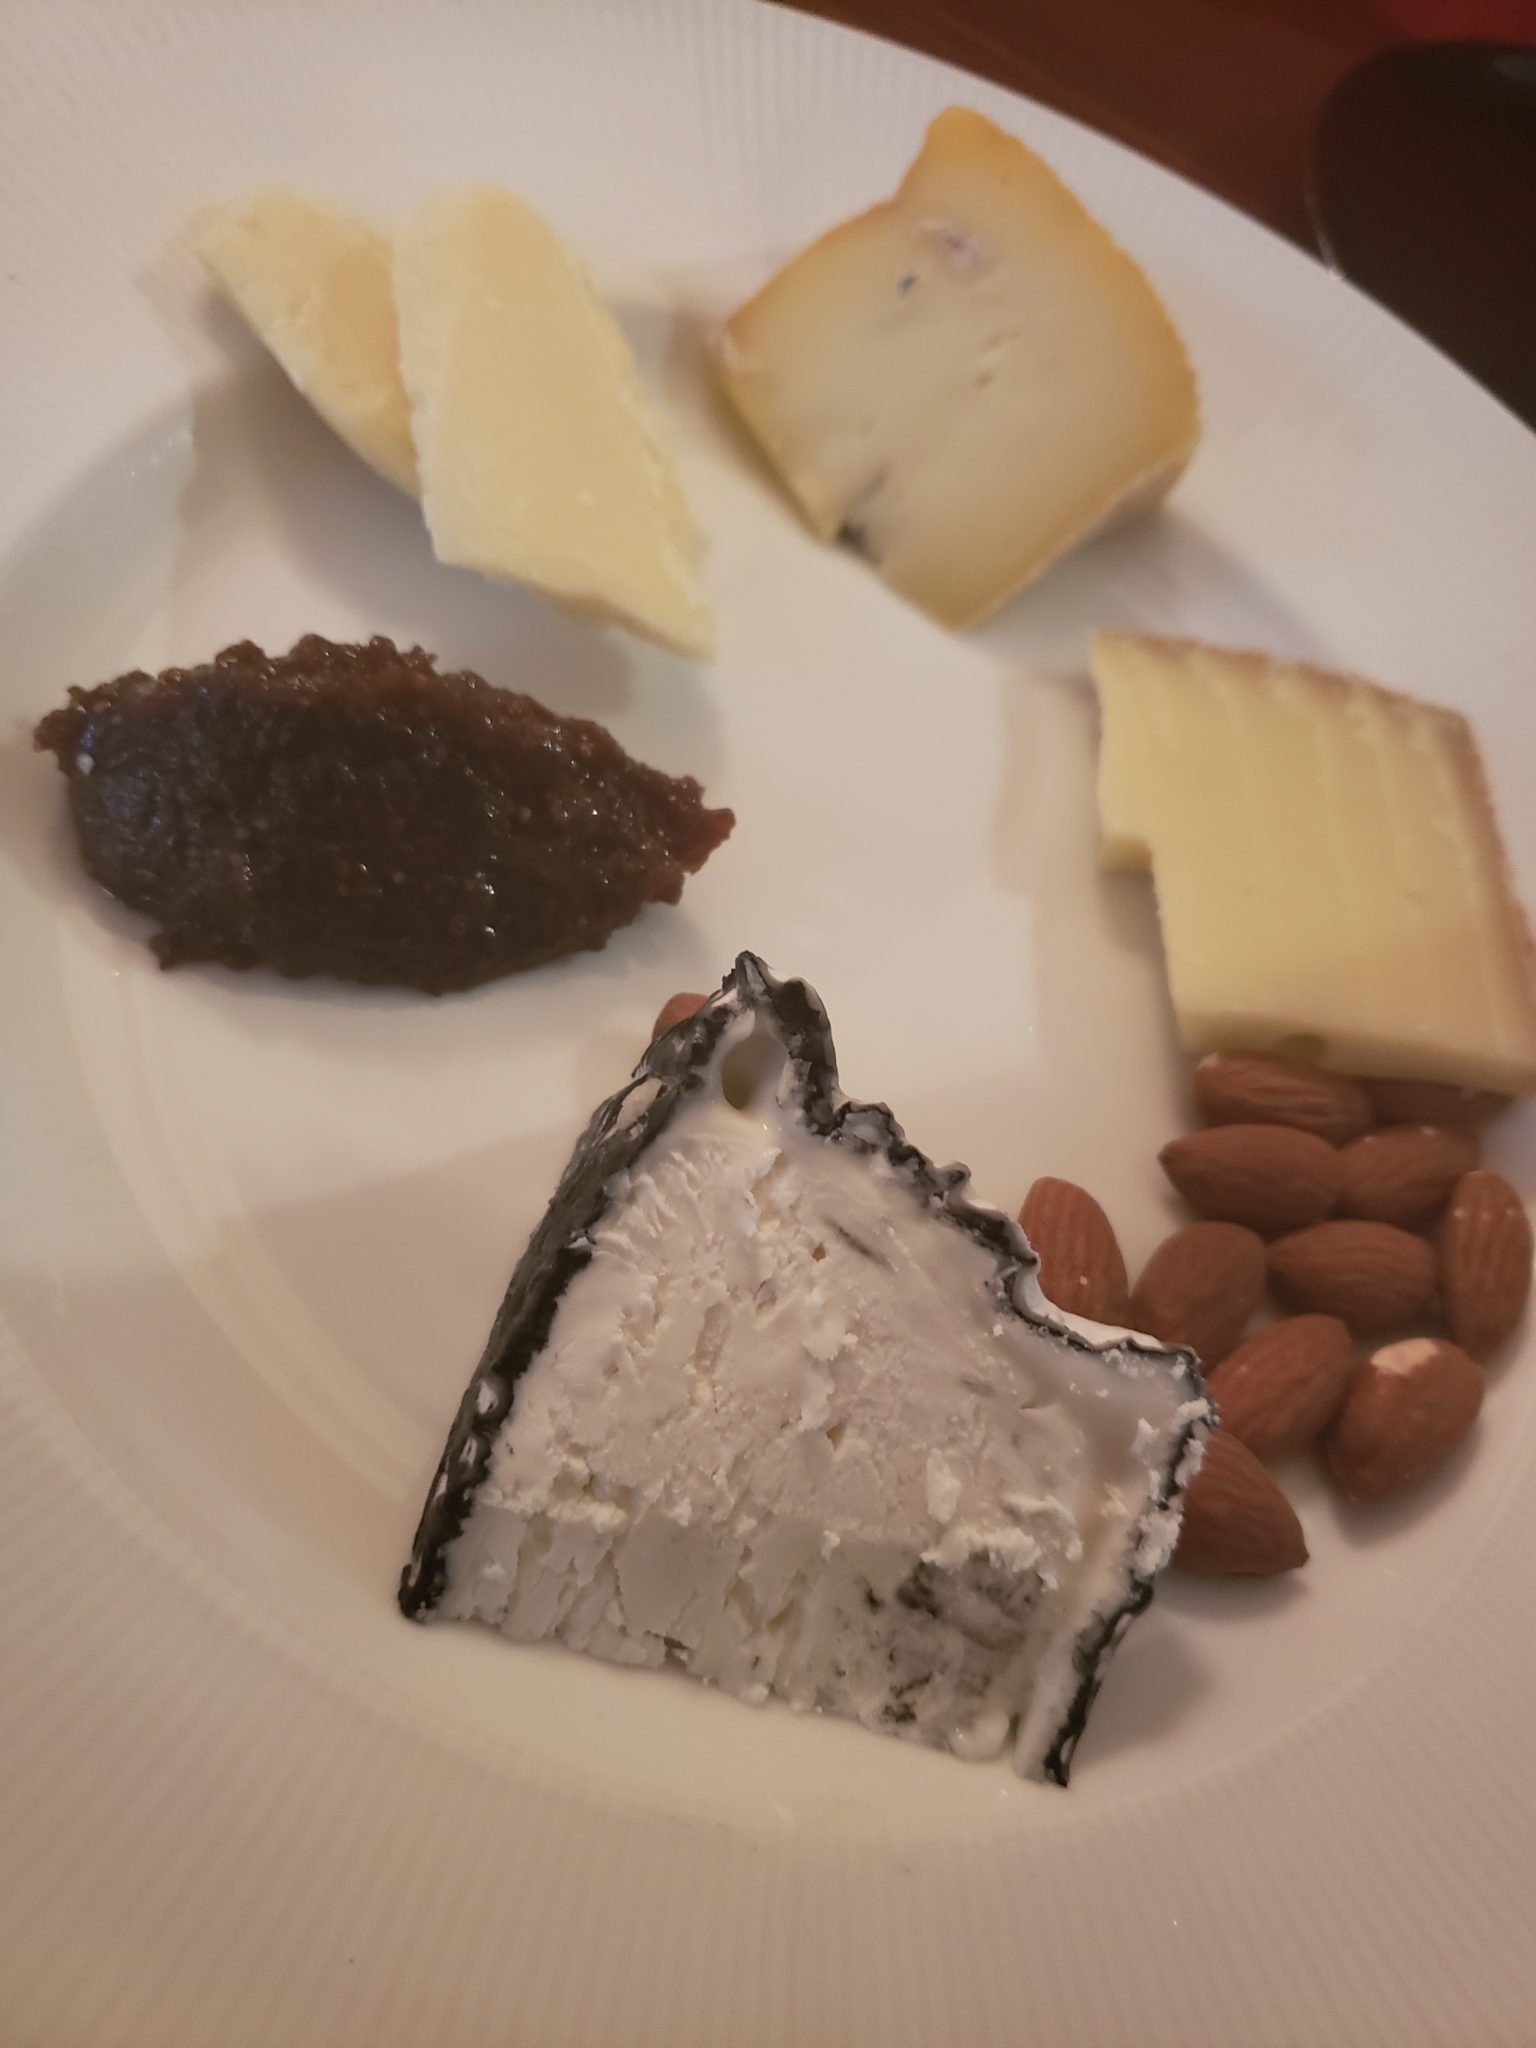 a plate of cheese and nuts